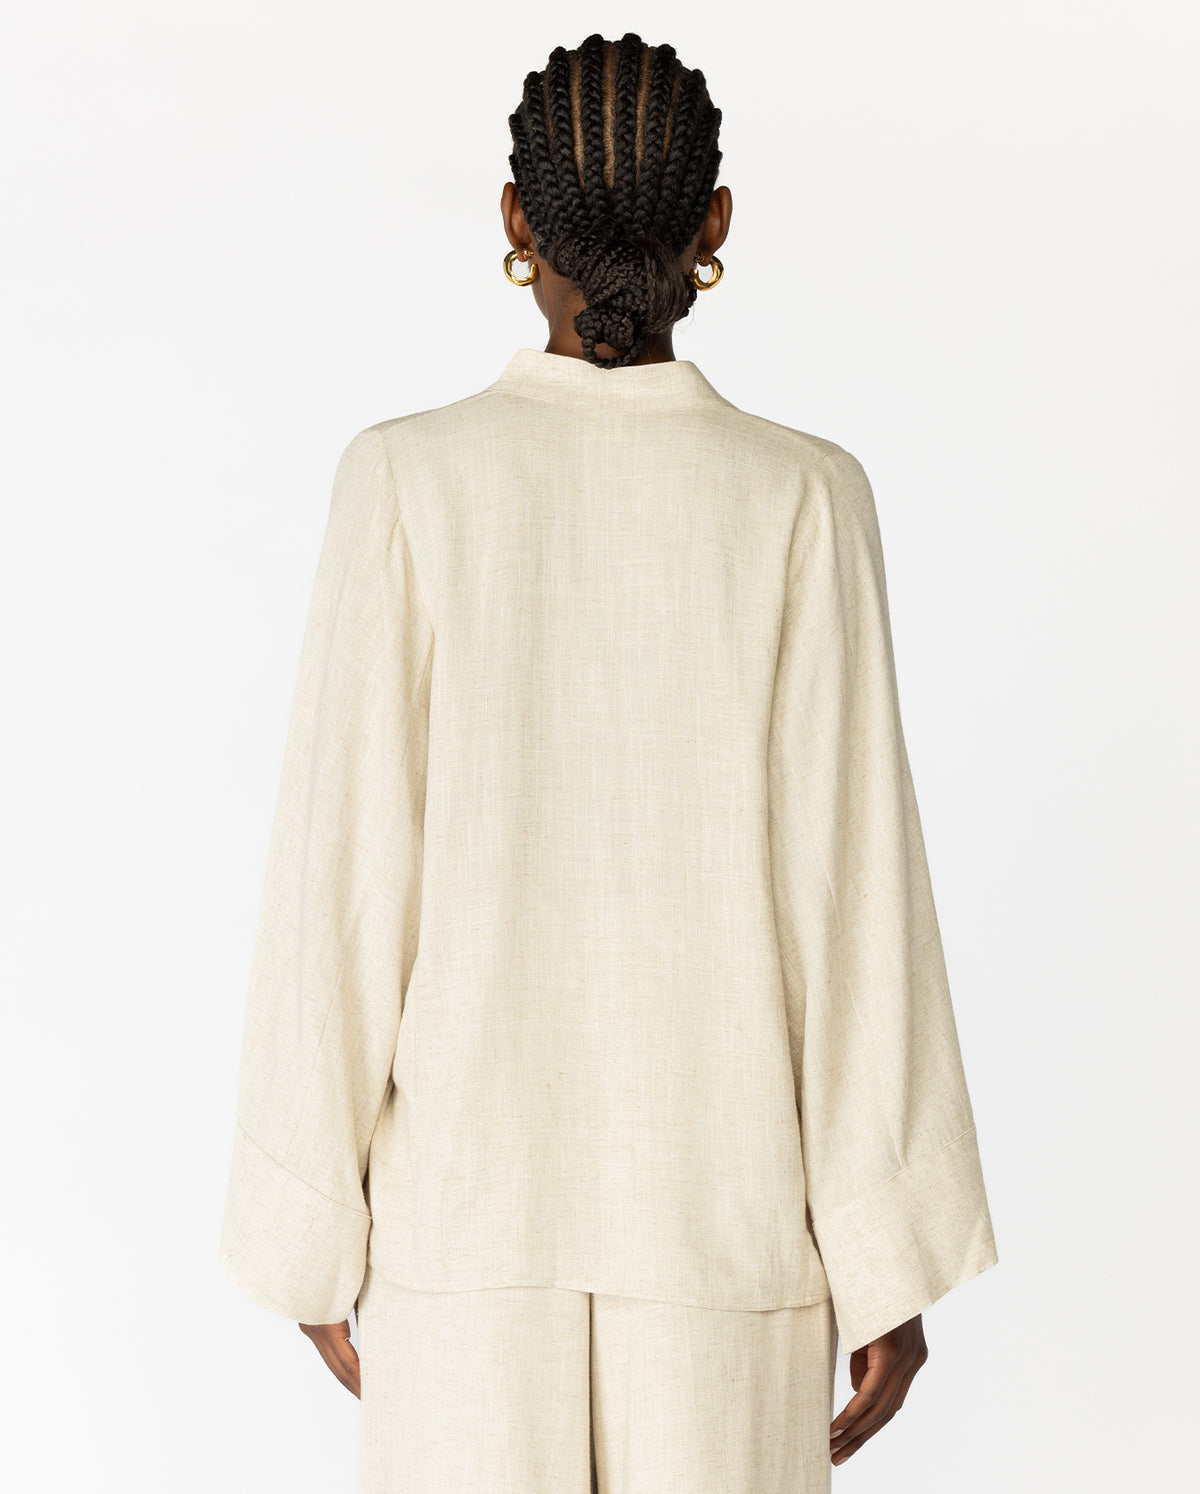 Lomaria Top - Undyed